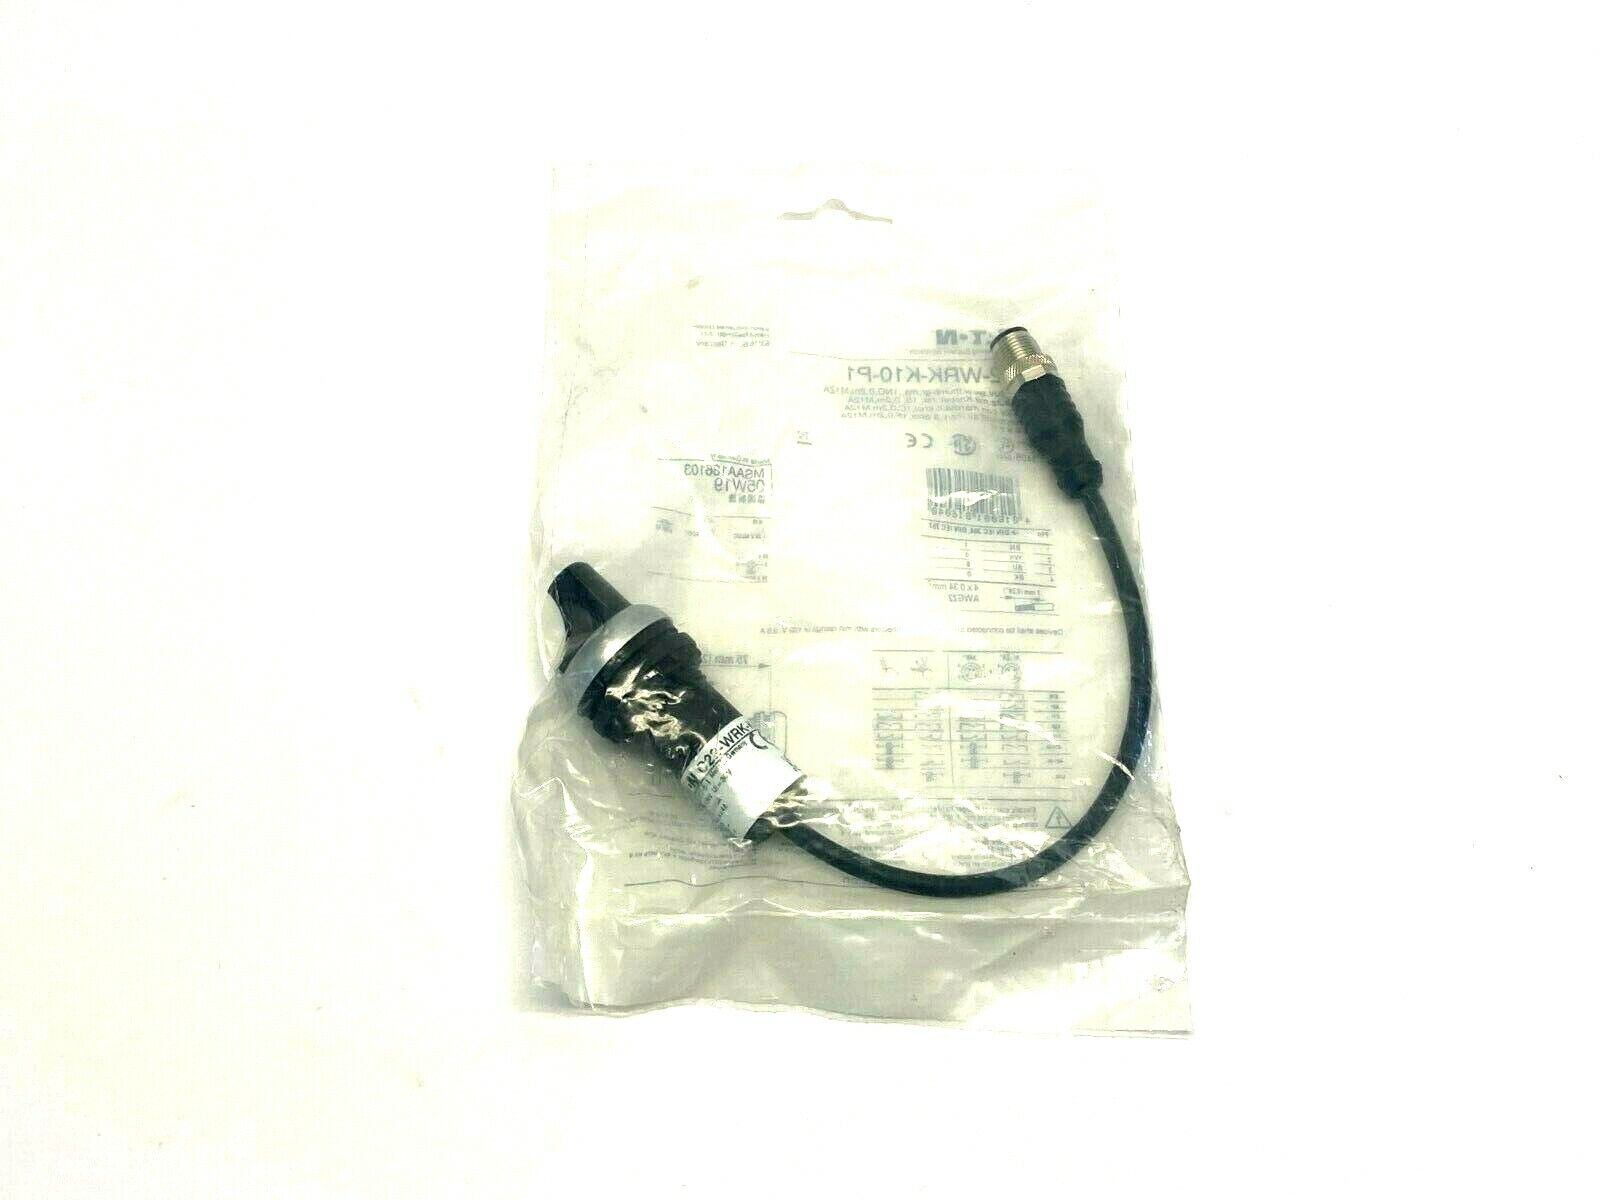 Eaton C22-WRK-K10-P1 Changeover Switch 22.5mm 2 Position w/ Cable to M12 Plug